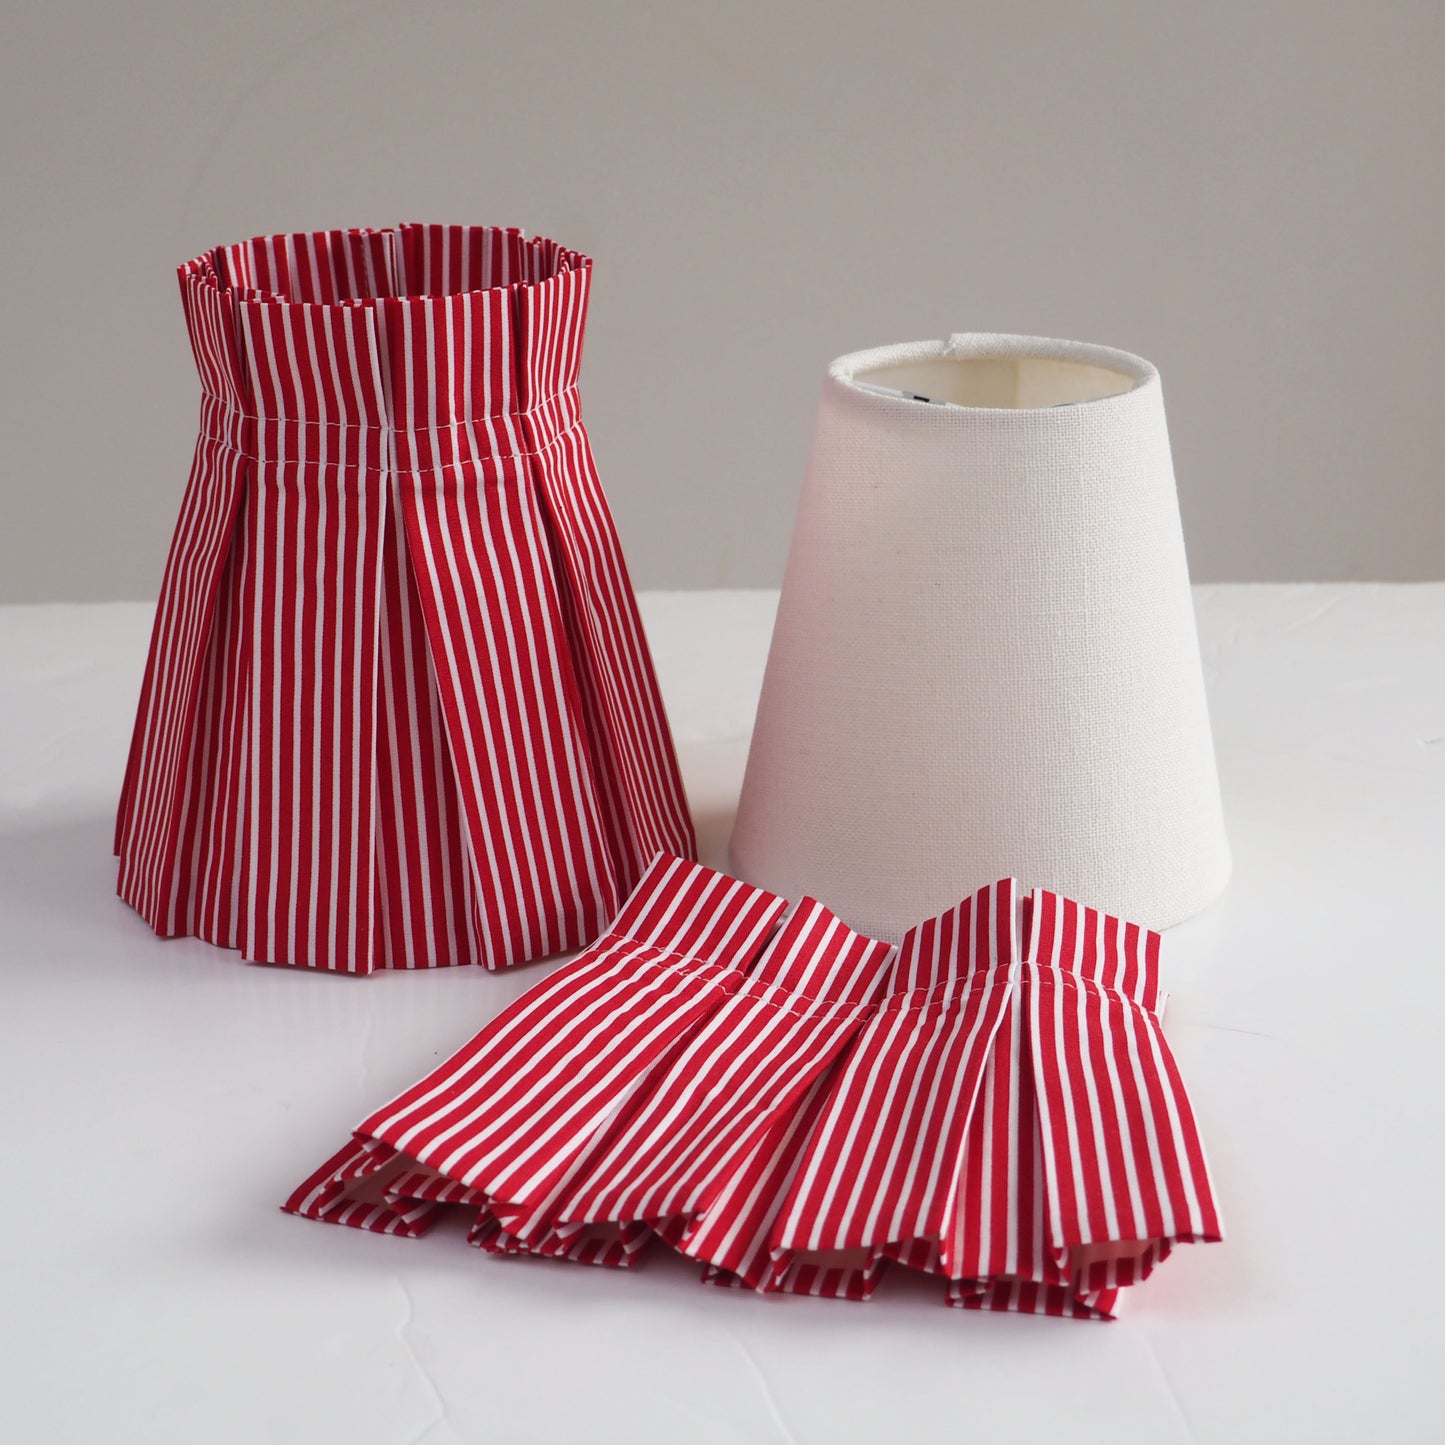 Candle clip box pleat red/white candy stripe fabric loose lampshade